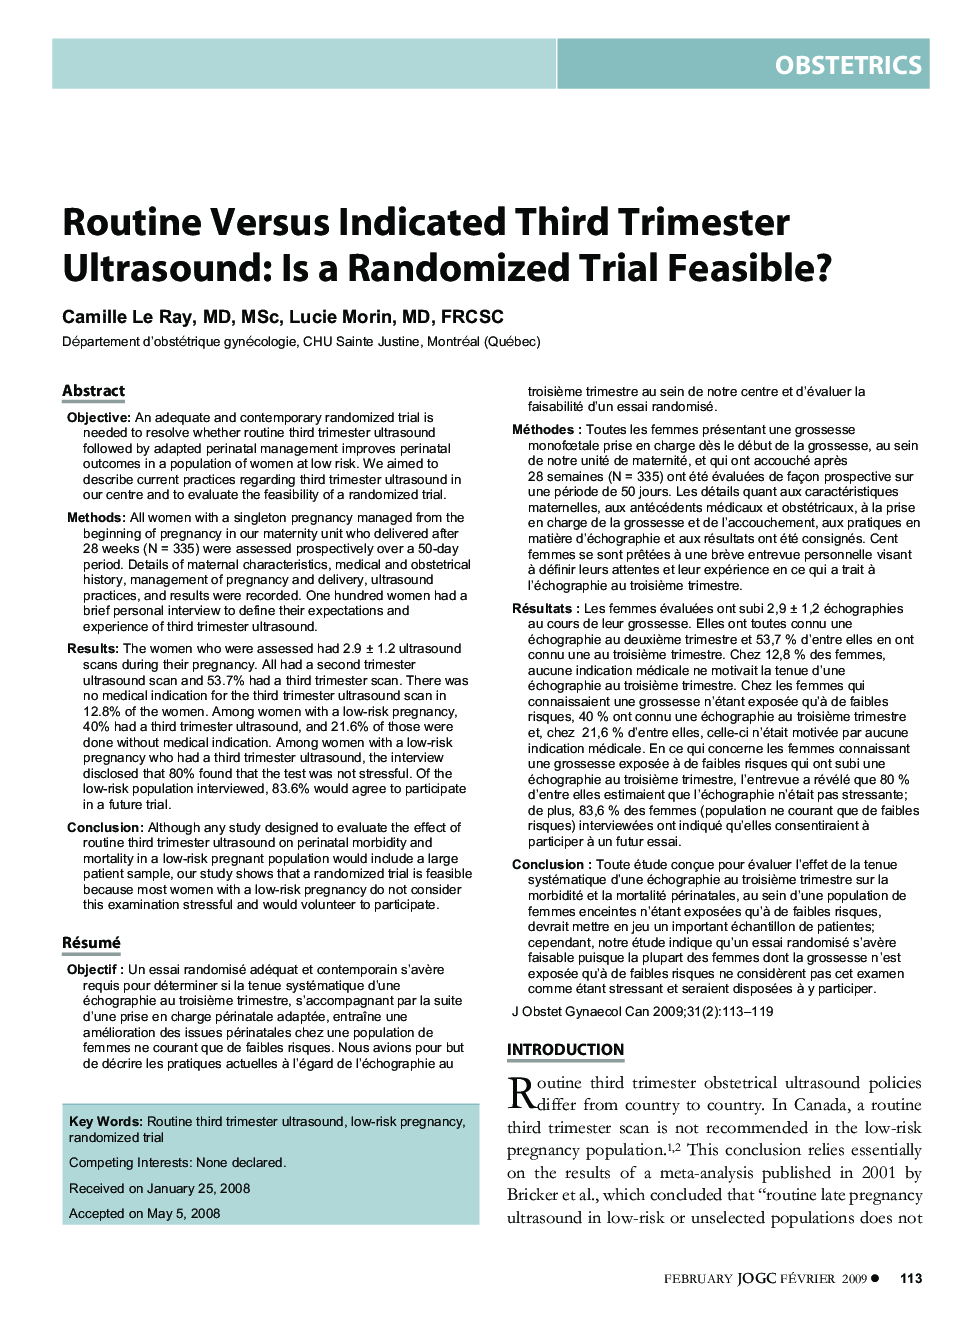 Routine Versus Indicated Third Trimester Ultrasound: Is a Randomized Trial Feasible?